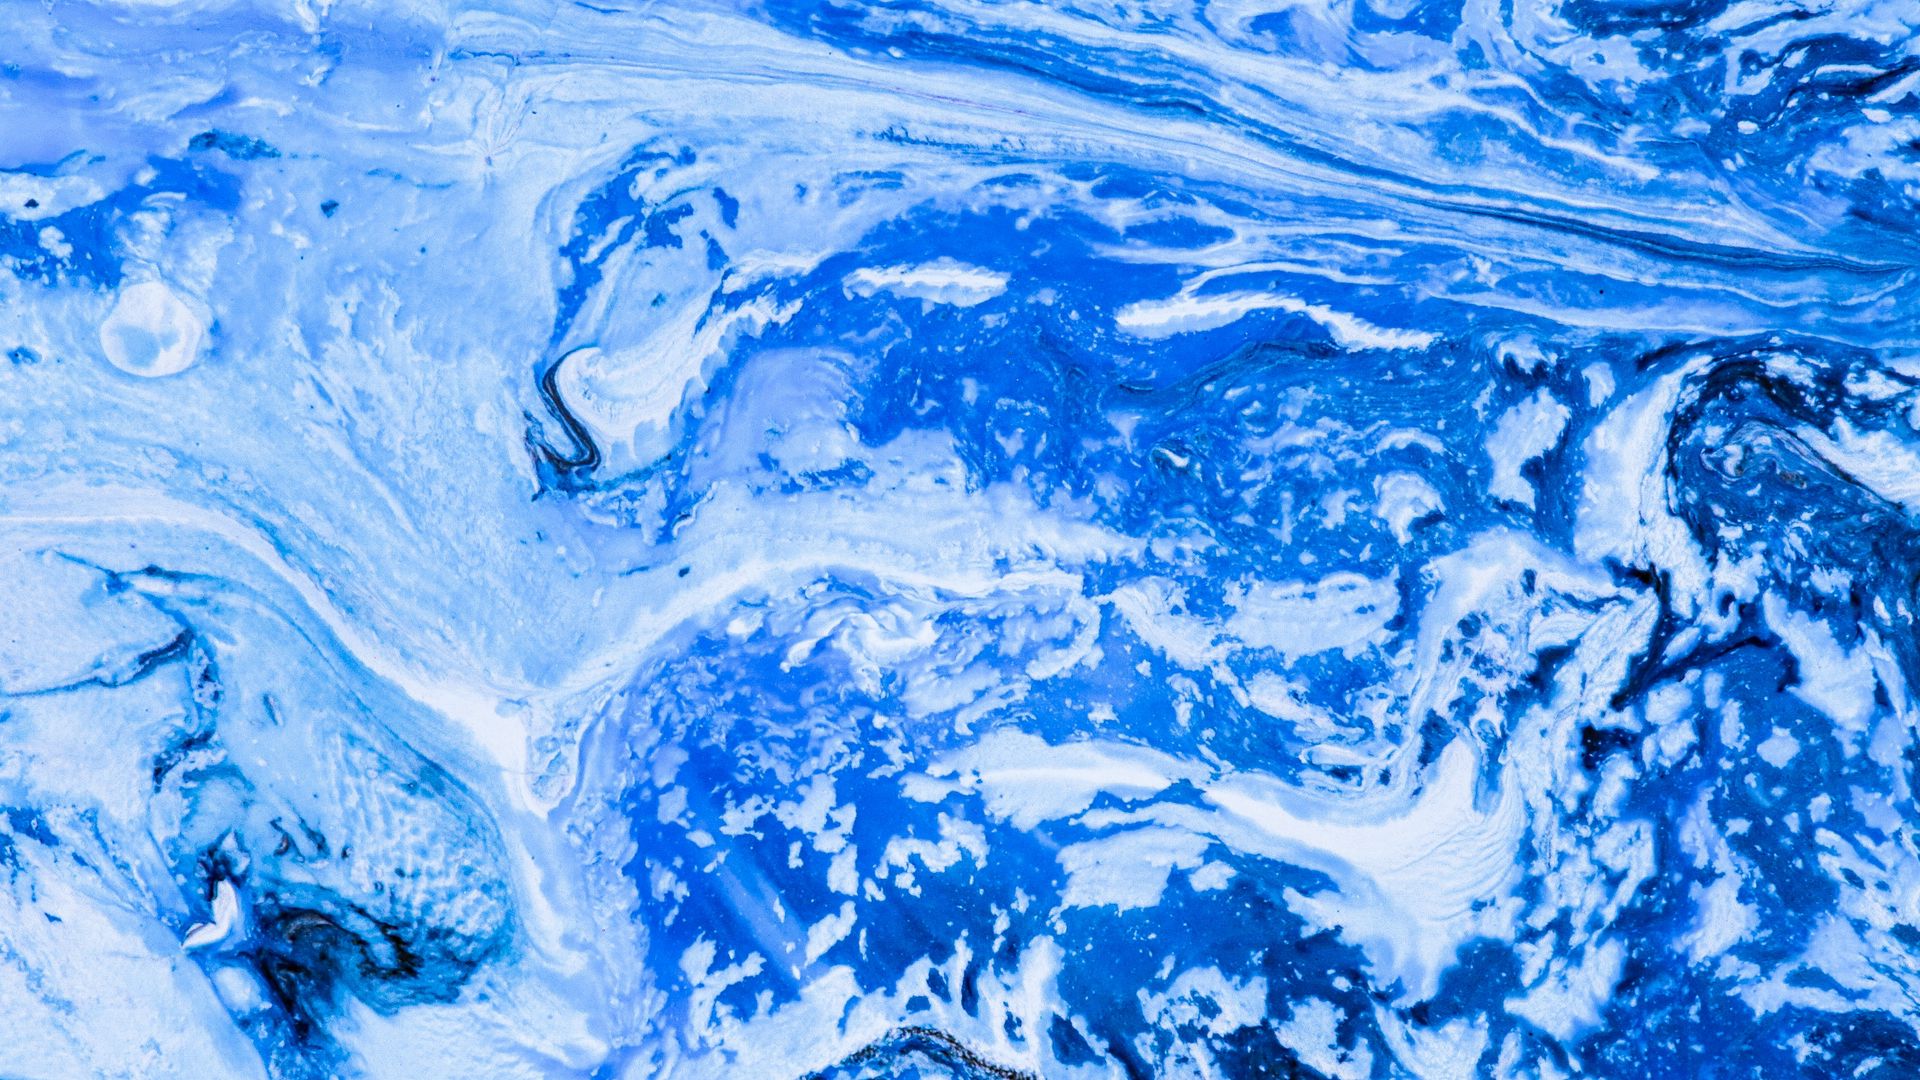 Download wallpaper 1920x1080 paint, stains, fluid art, abstraction ...